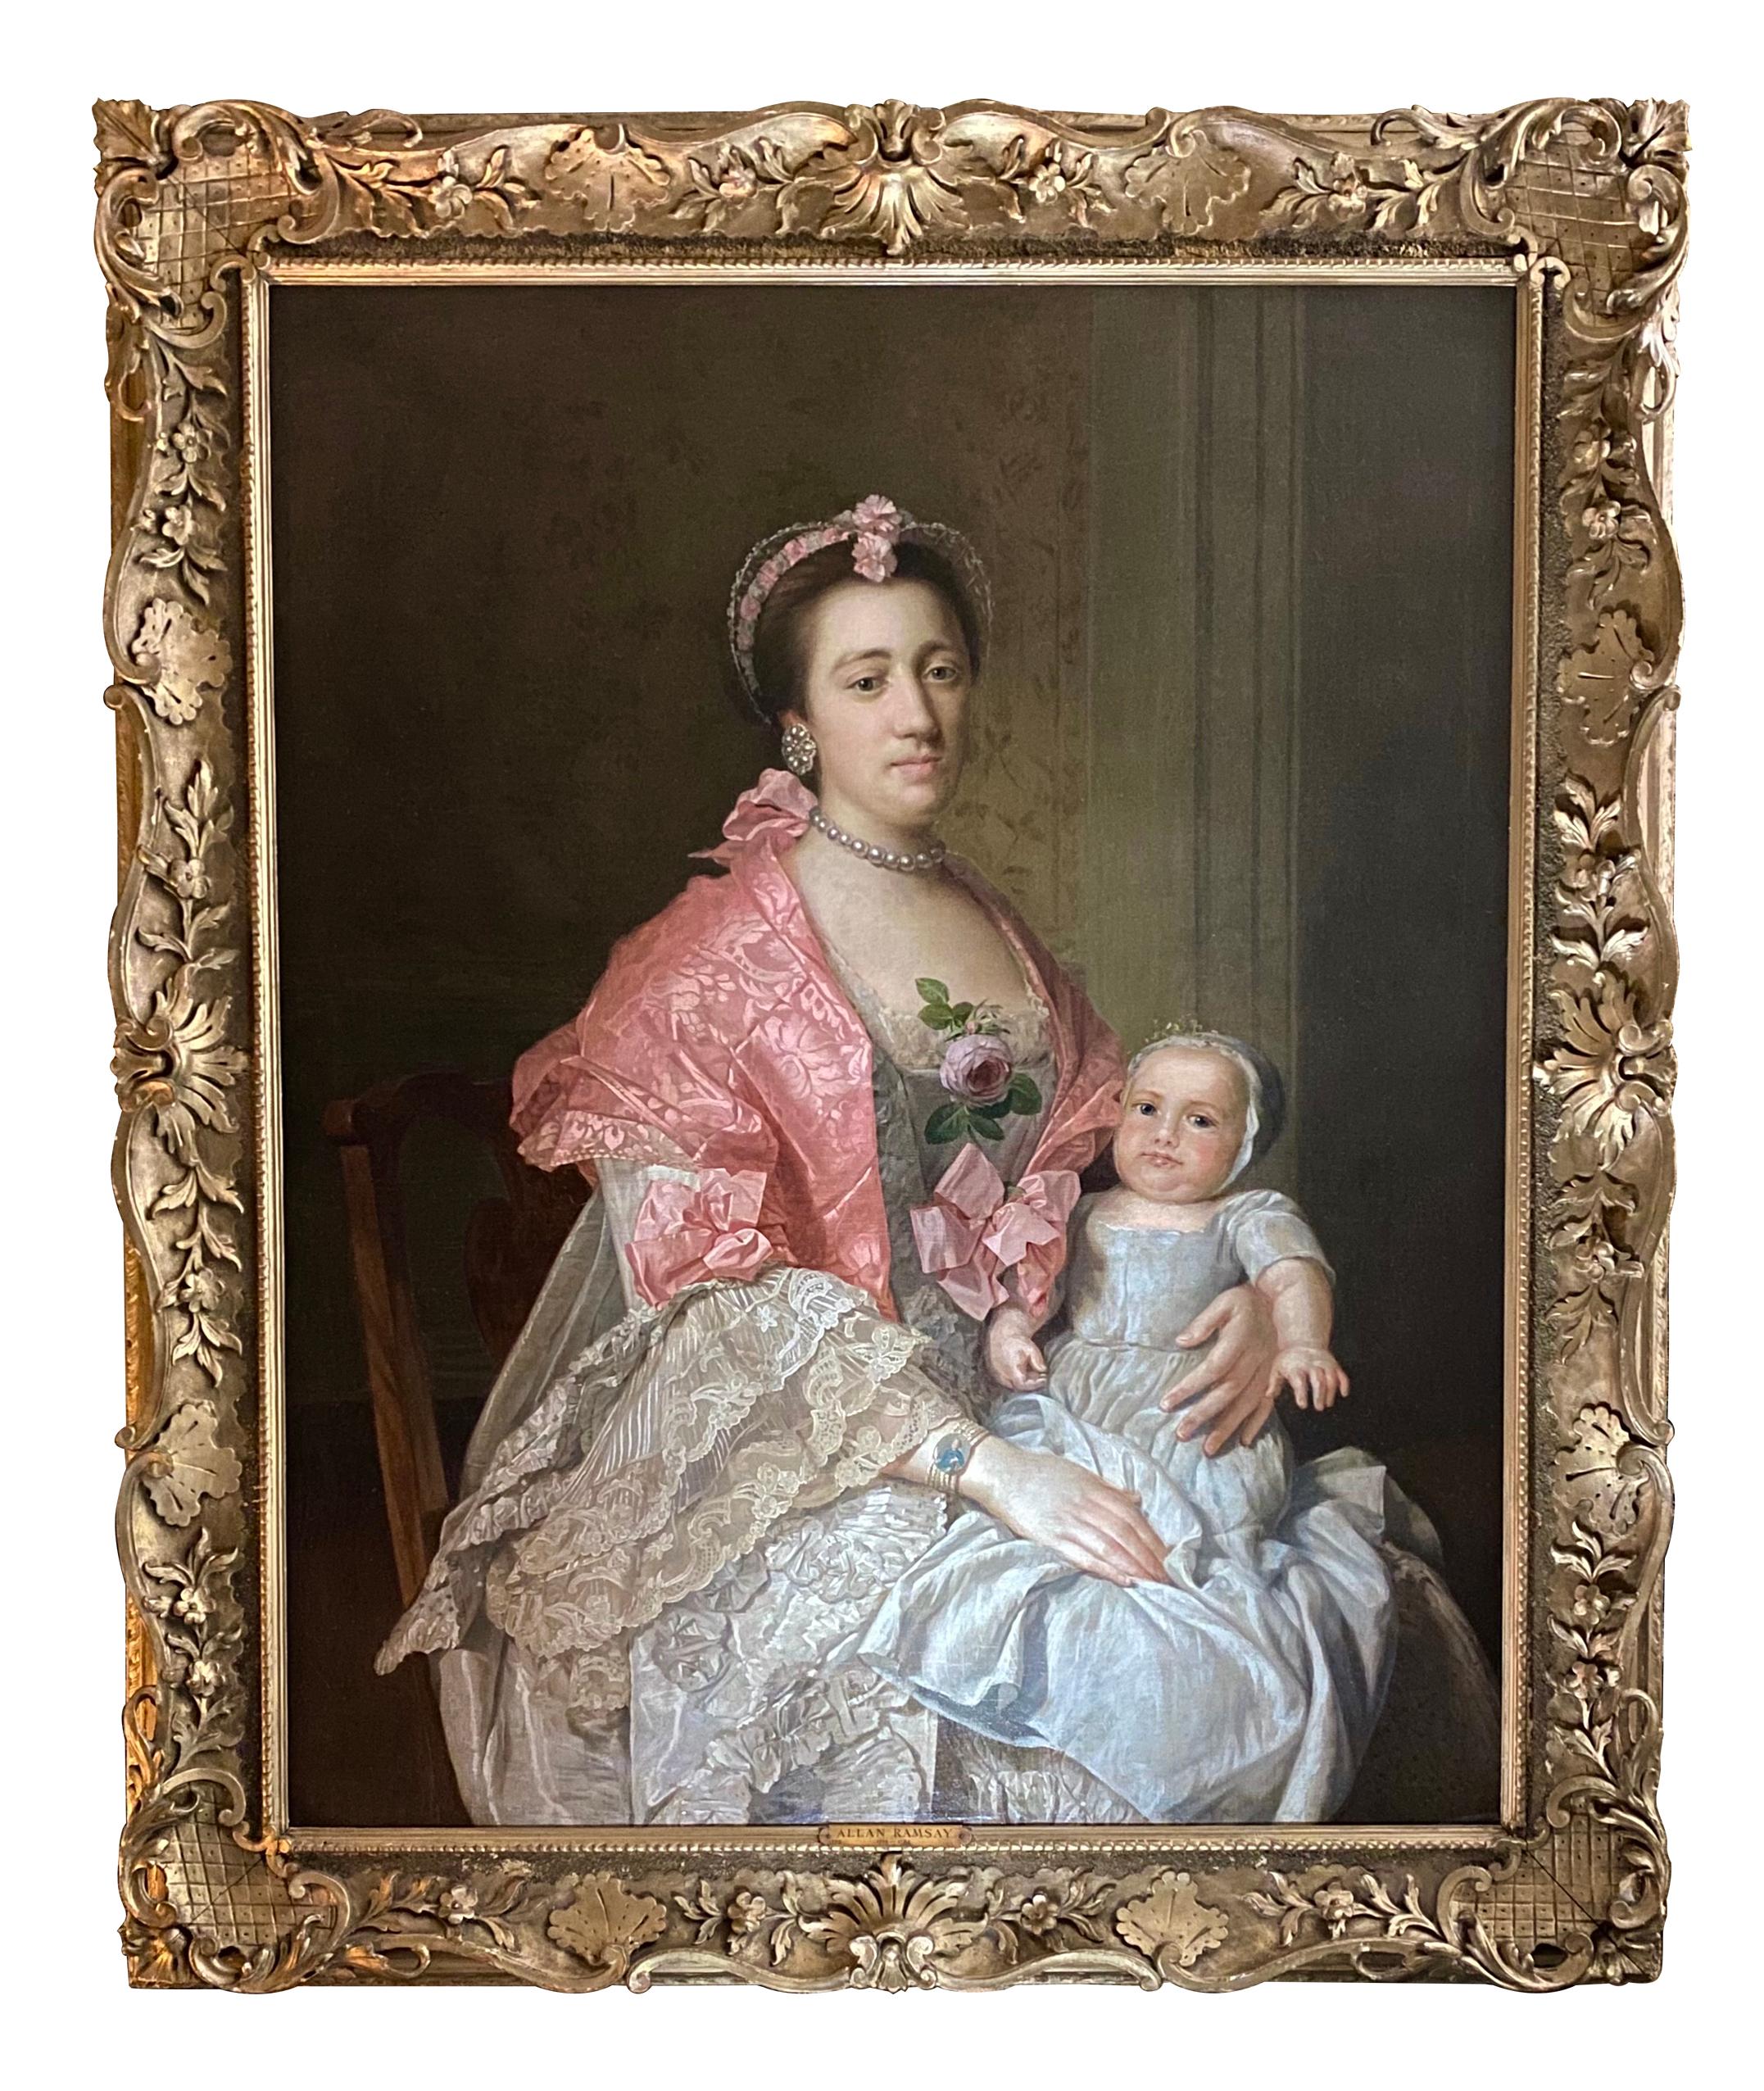 Studio of Sir Allan Ramsay Interior Painting - 18th Century English Portrait of a Lady and her Child.